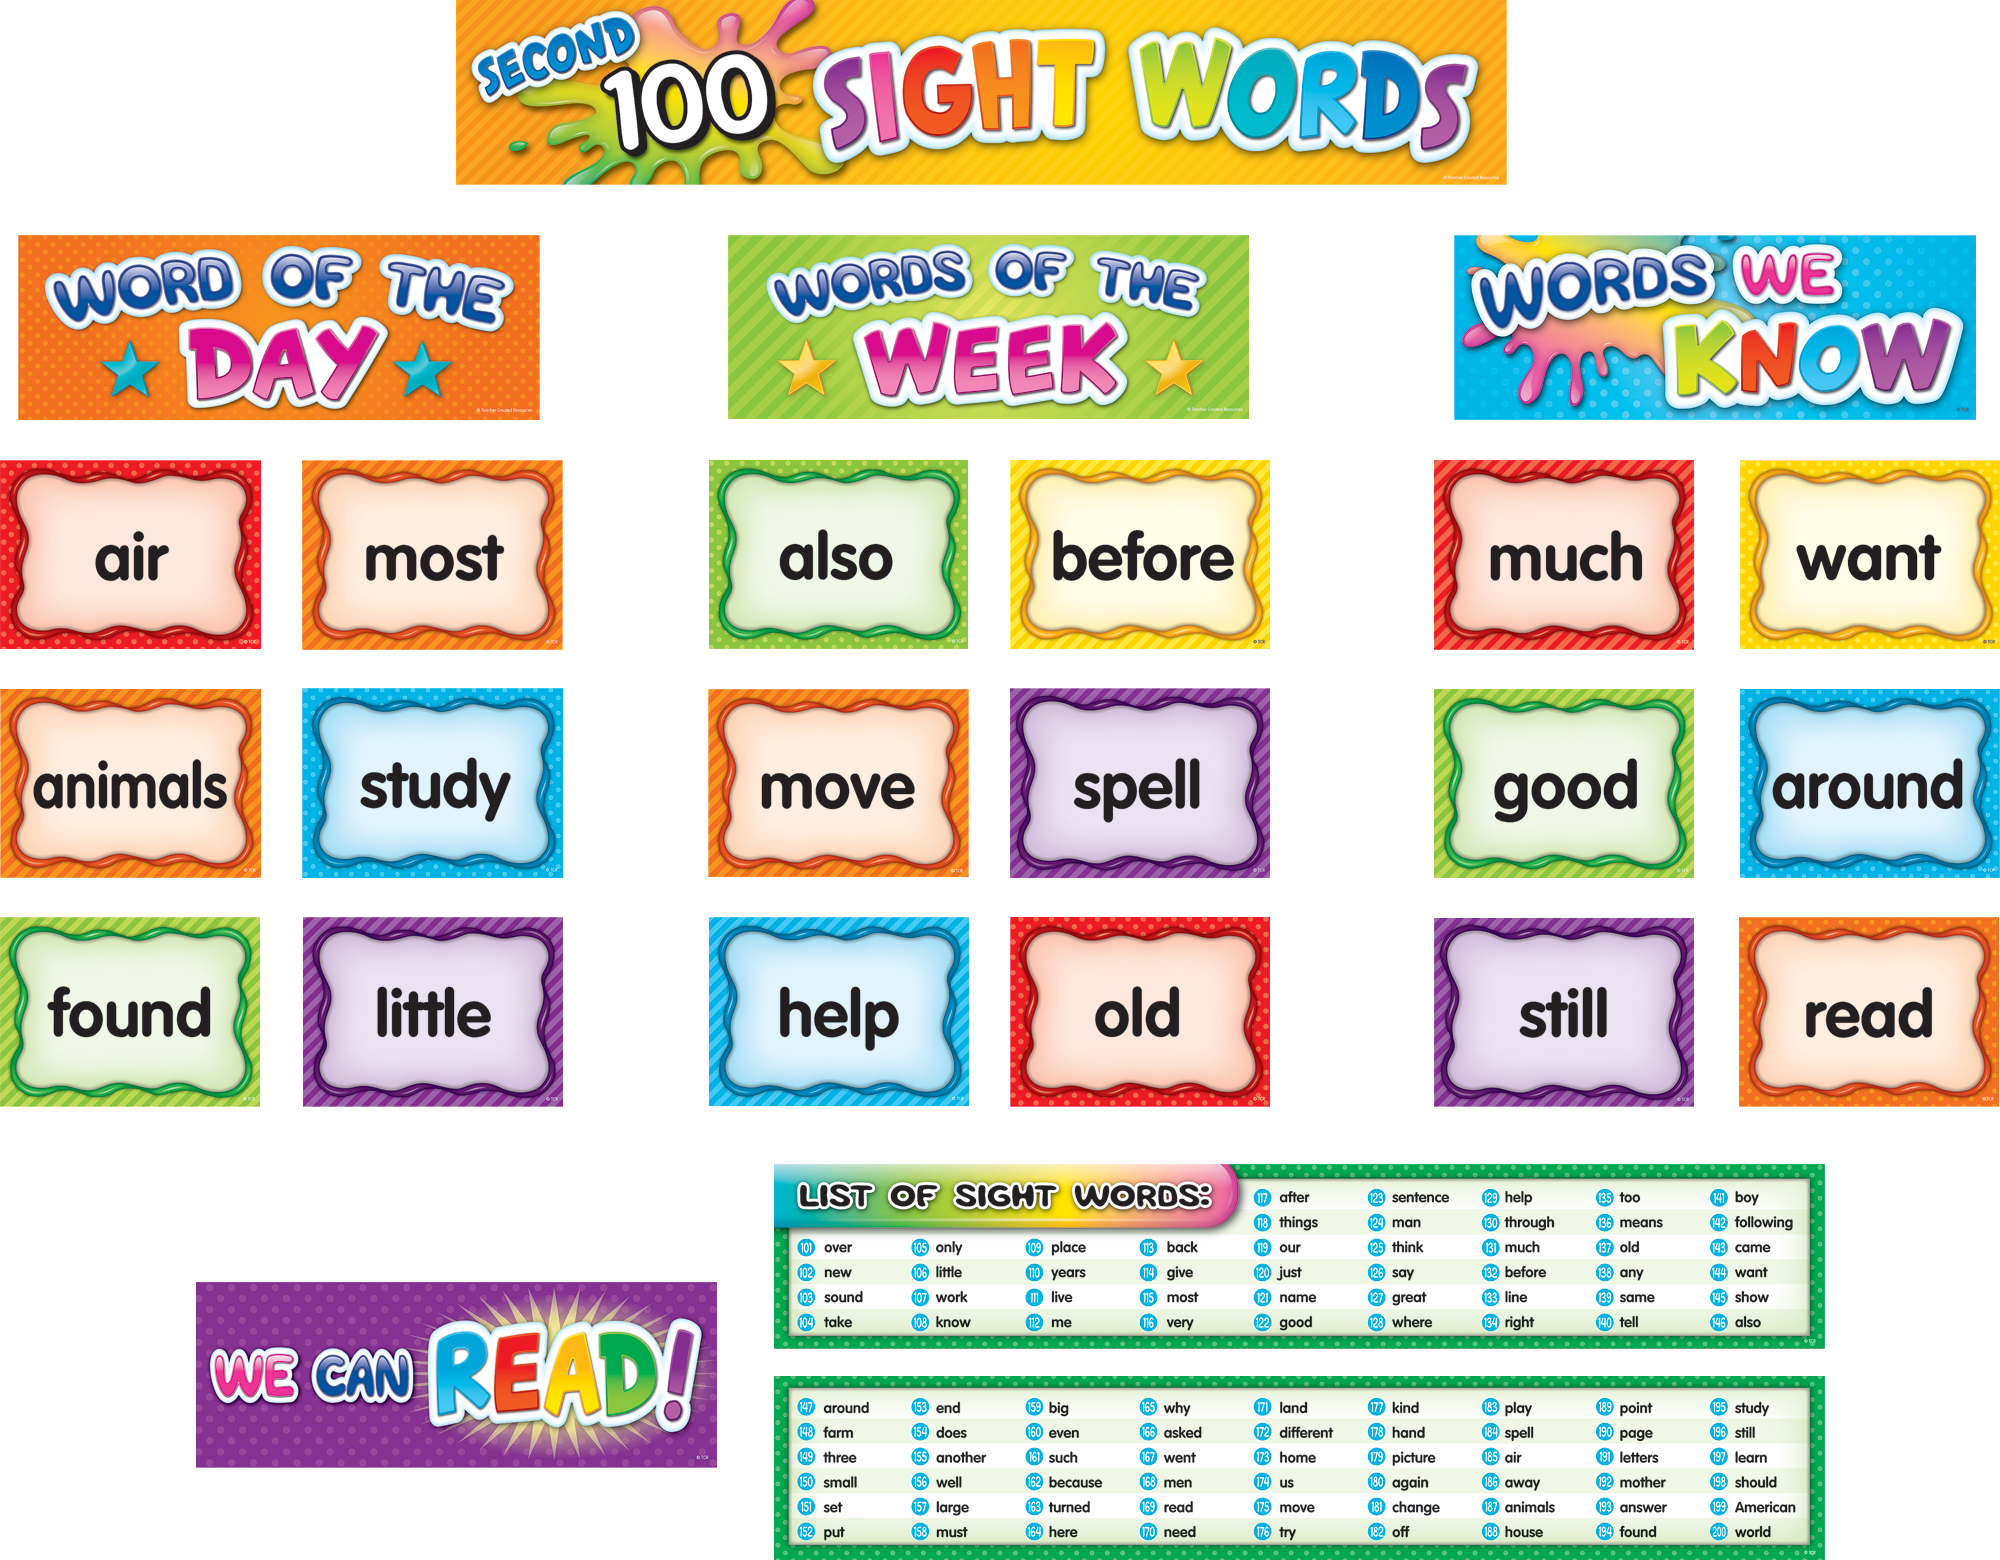 pocket flash cards sight words real objects